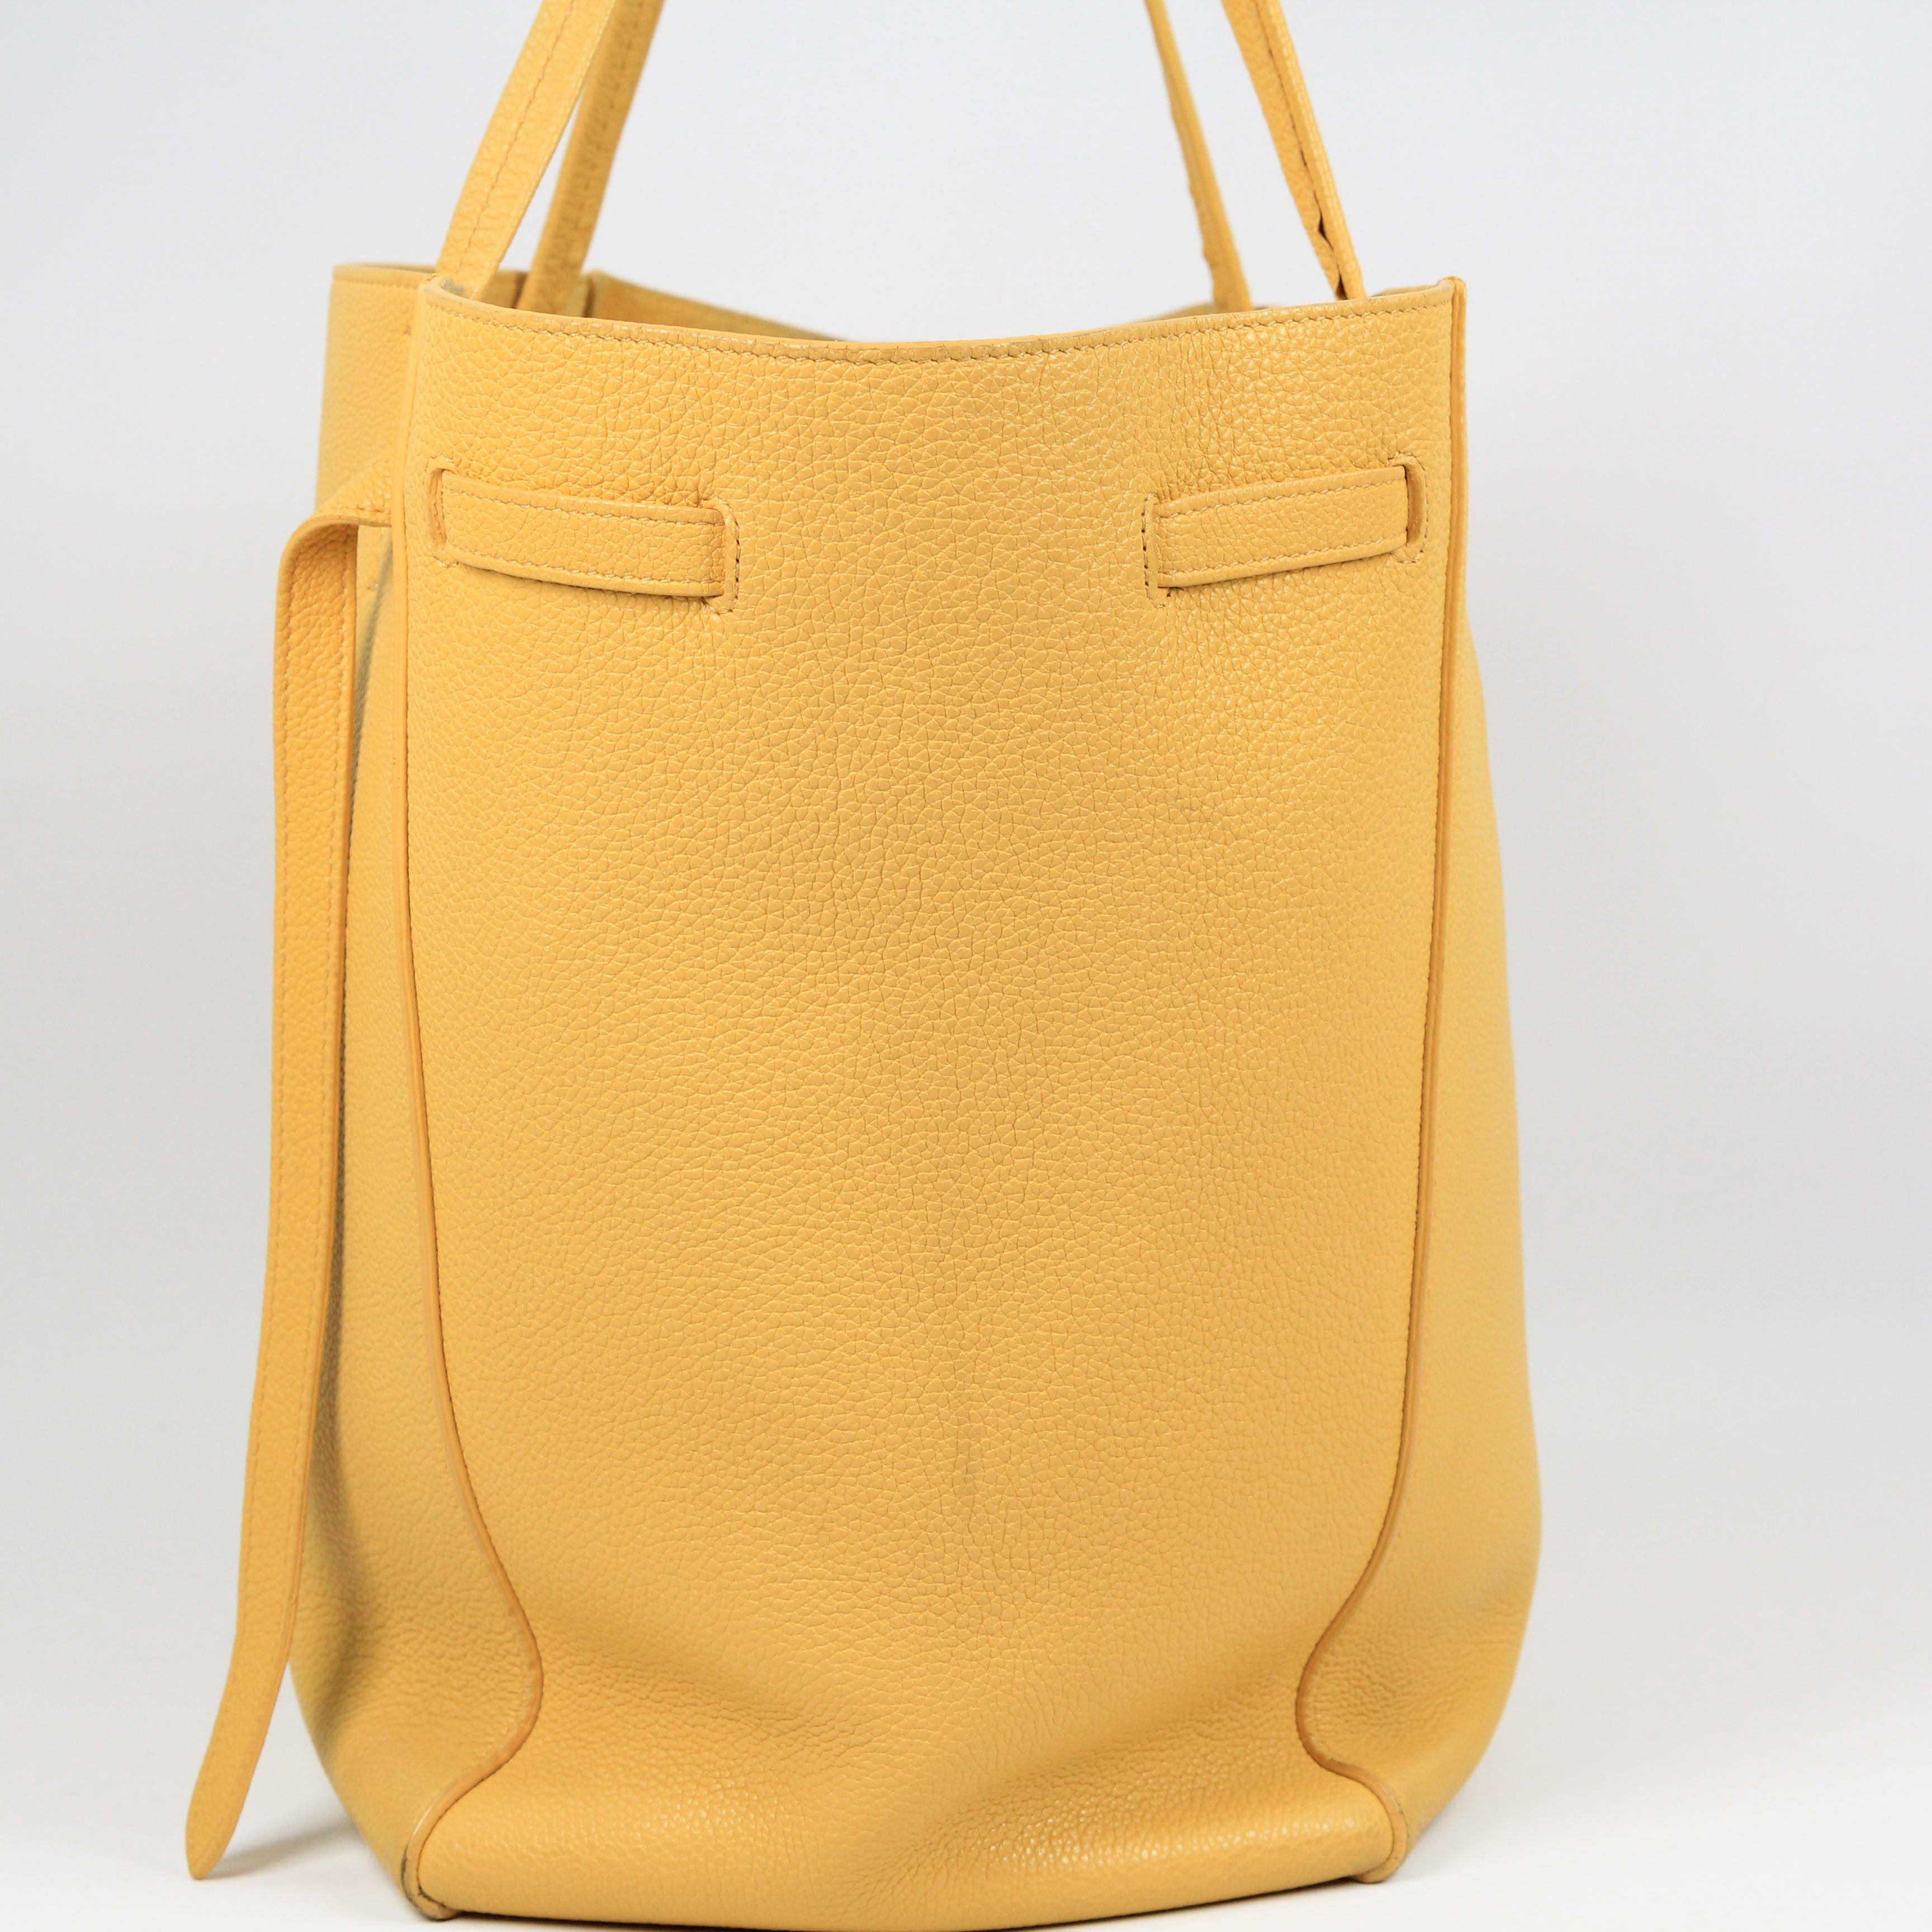 This small Phantom Cabas Tie tote has a belted cinch at the sides with ties that hang in the front of the bag or that can be tied up in a bow. Crafted out of gorgeous yellow drummed calfskin leather, this bag reminds us the Celine loves their high